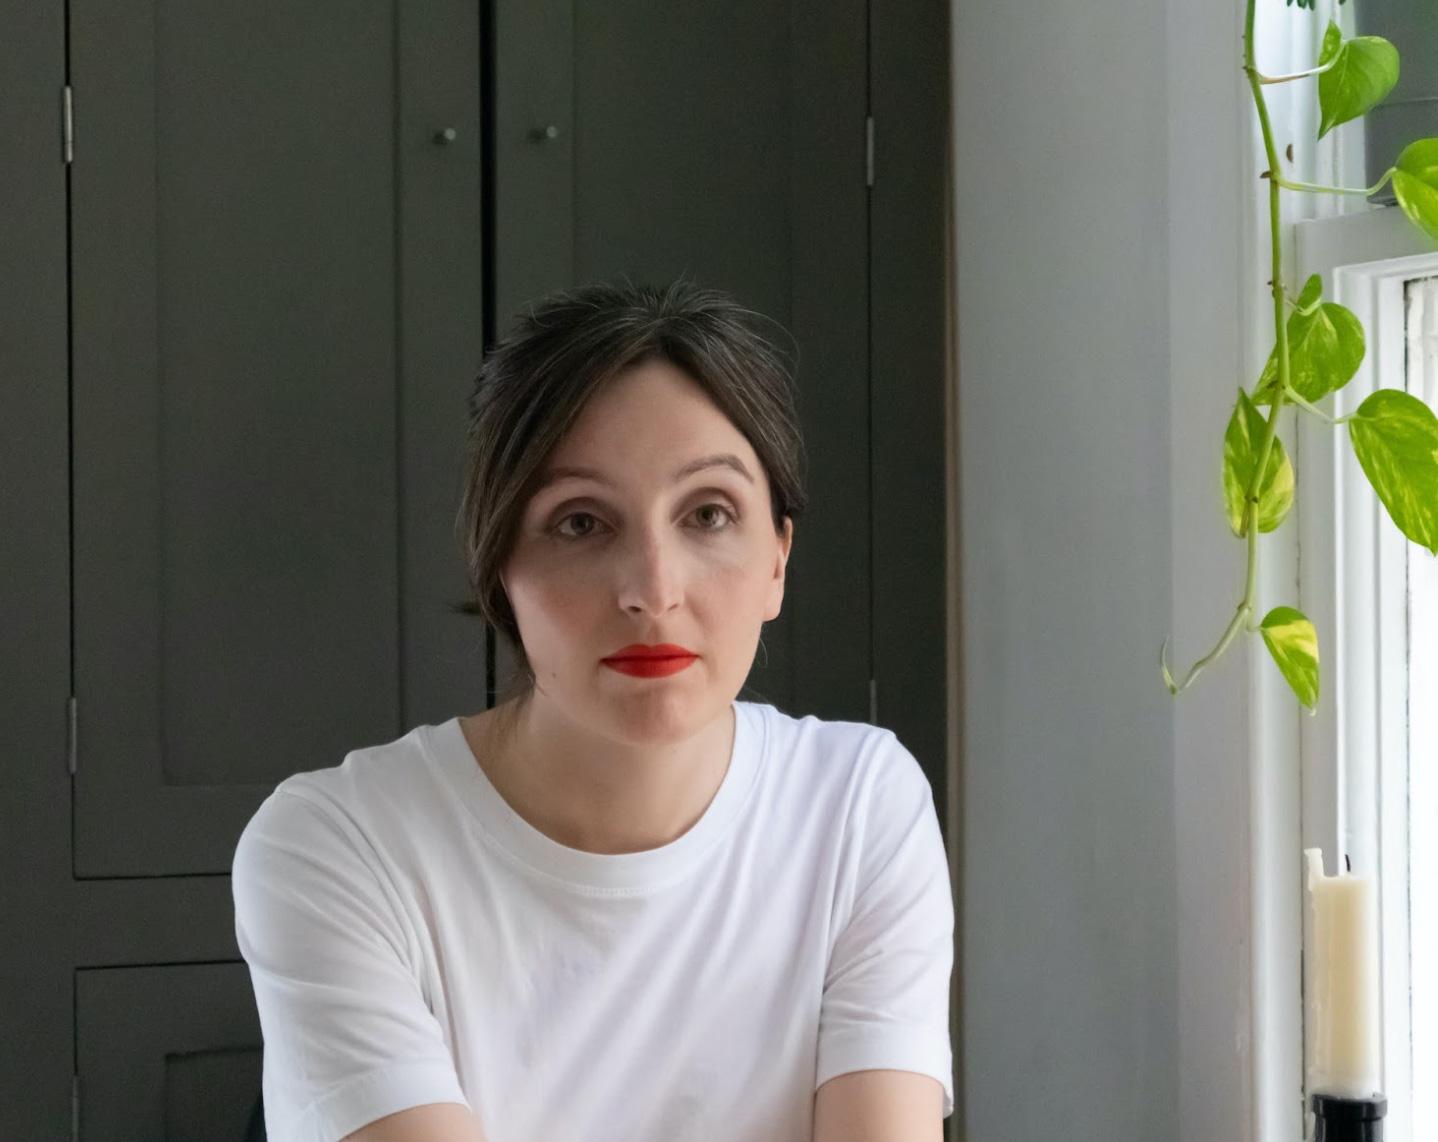 Portrait of a white woman with brown hair and red lipstick in a white t-shirt looking past the camera.